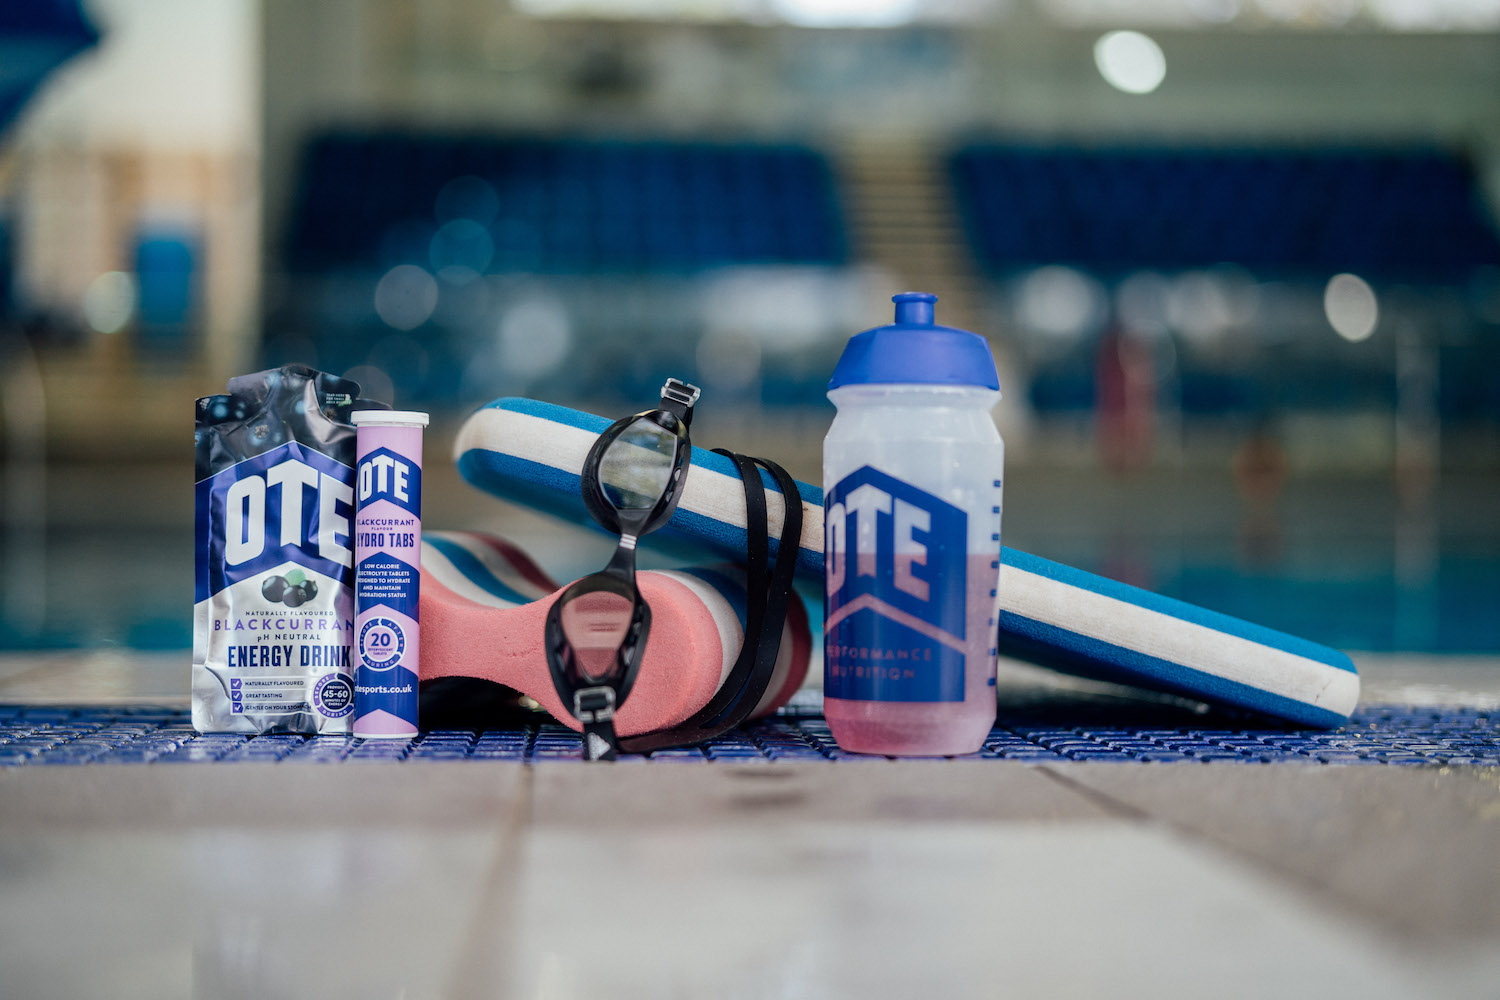 Selection of OTE Sports products placed around swimming goggles and floats.